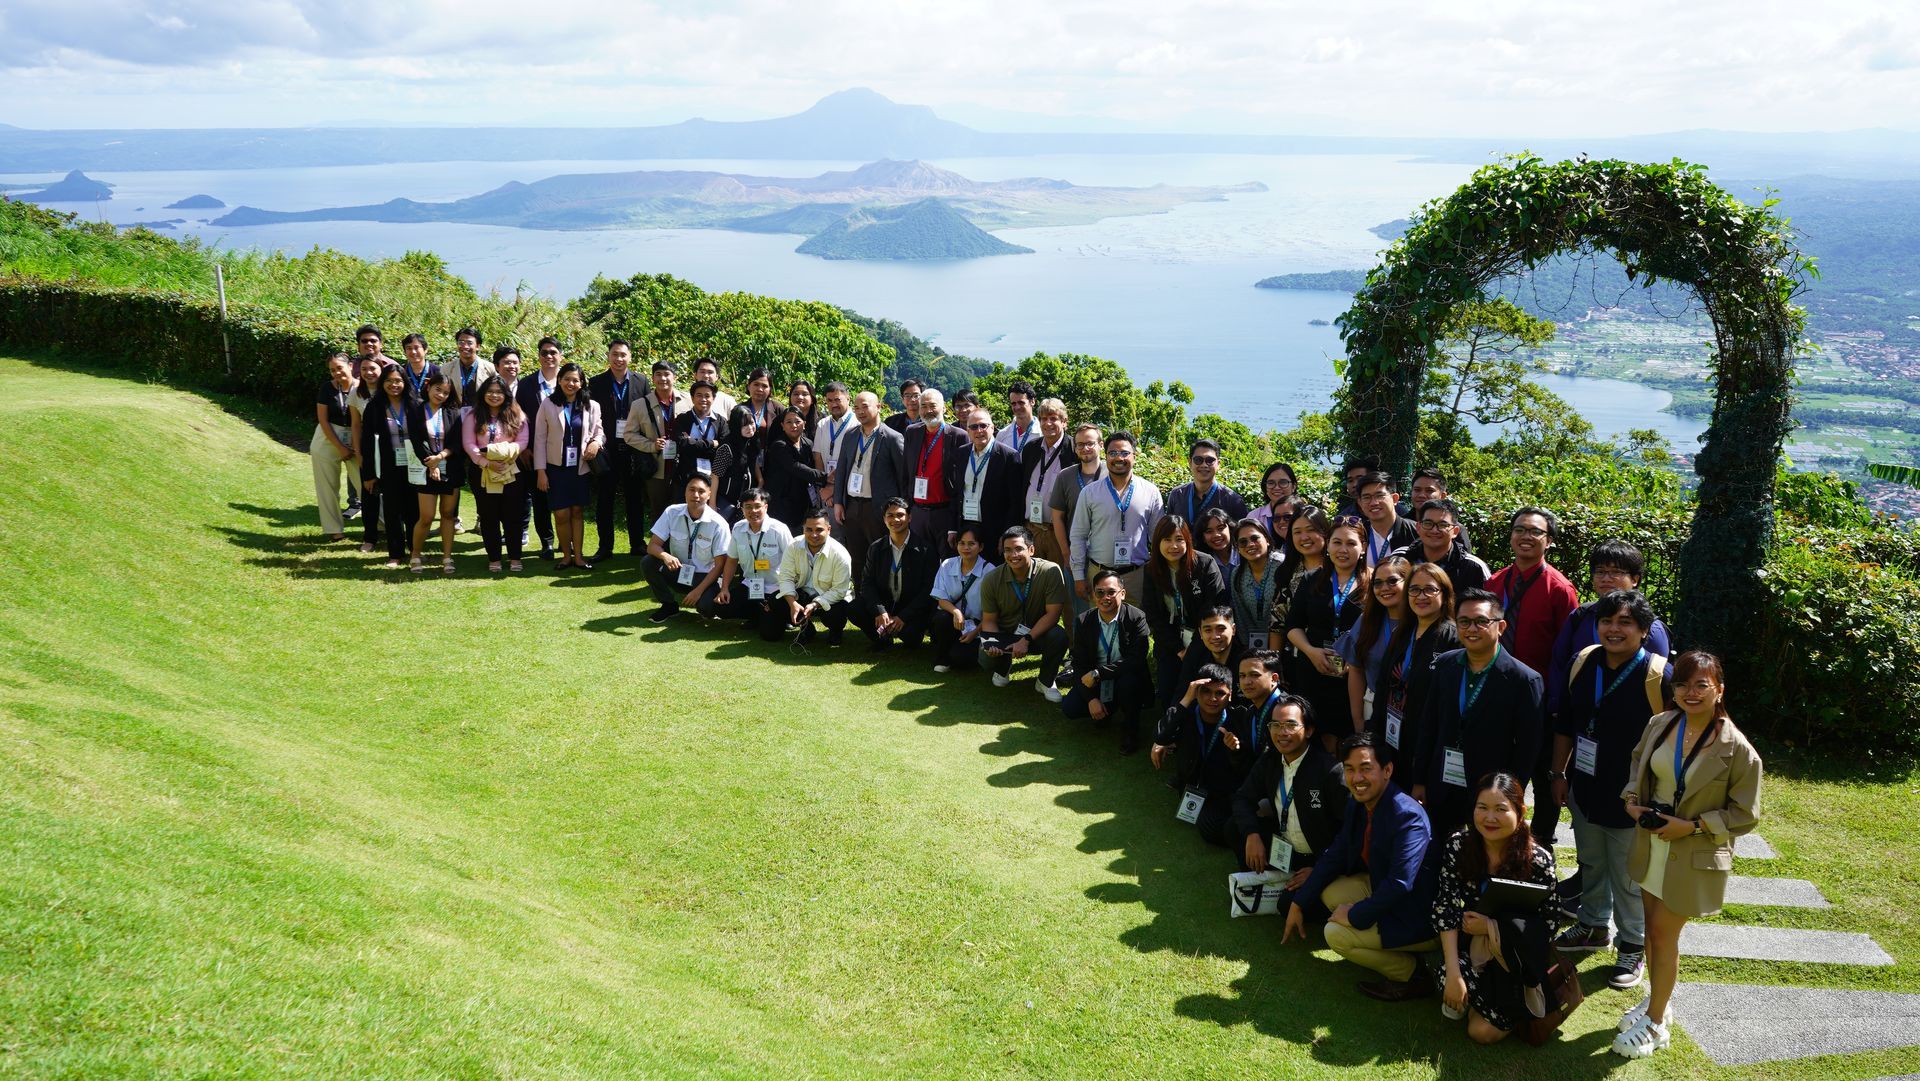 Local and international participants of the Energy-X Workshop get together at the garden of Taal Vista Hotel during lunch break for networking.